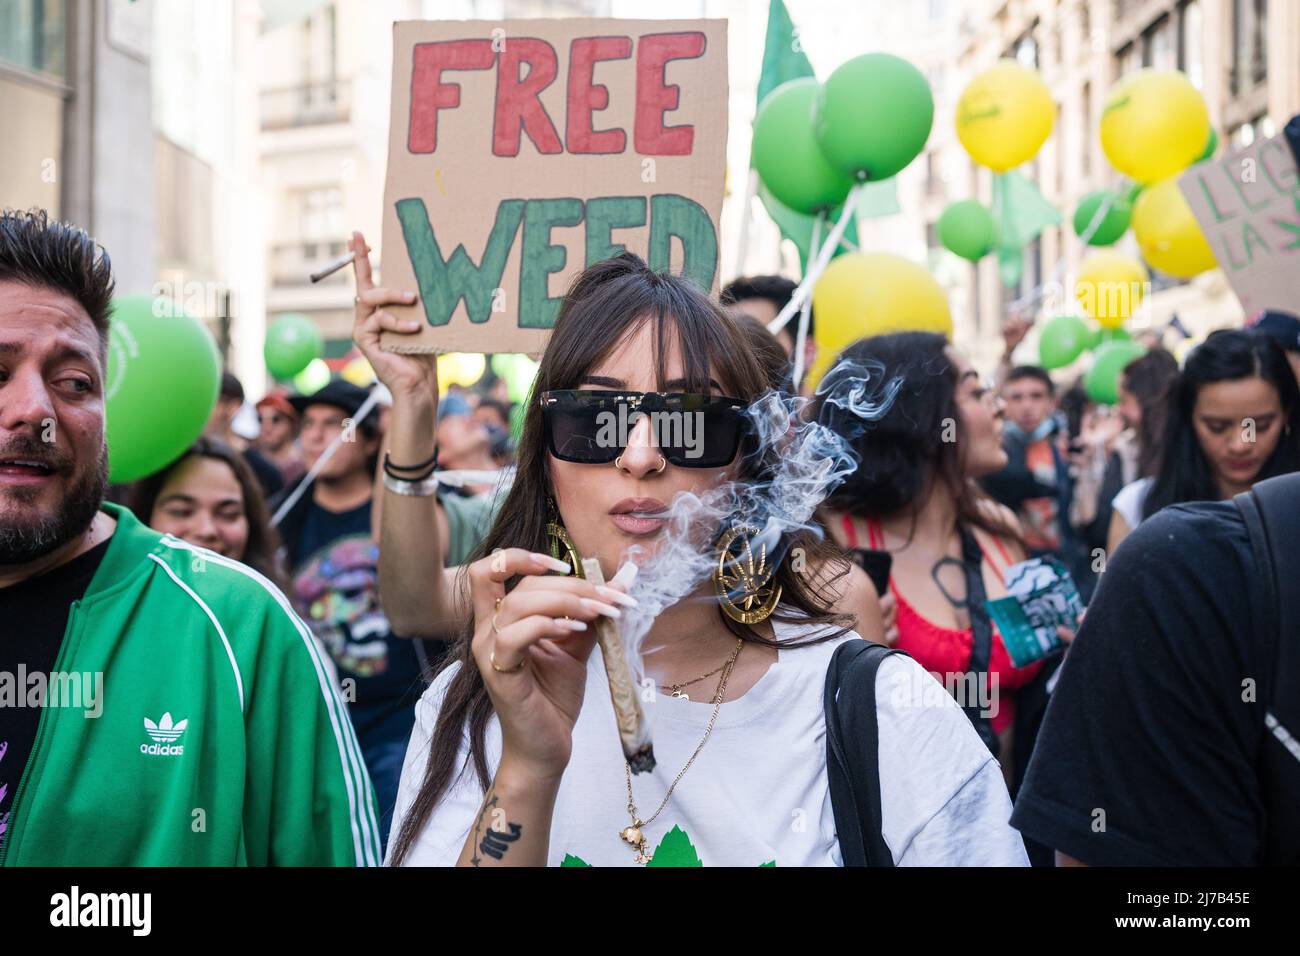 A pro-cannabis protester smokes a joint during a demonstration. Thousands of pro-cannabis activists took part in a demonstration in La Gran Via in Madrid, Spain, in favor of legalizing the medicinal and recreational use of marijuana. (Photo by Diego Radames / SOPA Images/Sipa USA) Stock Photo